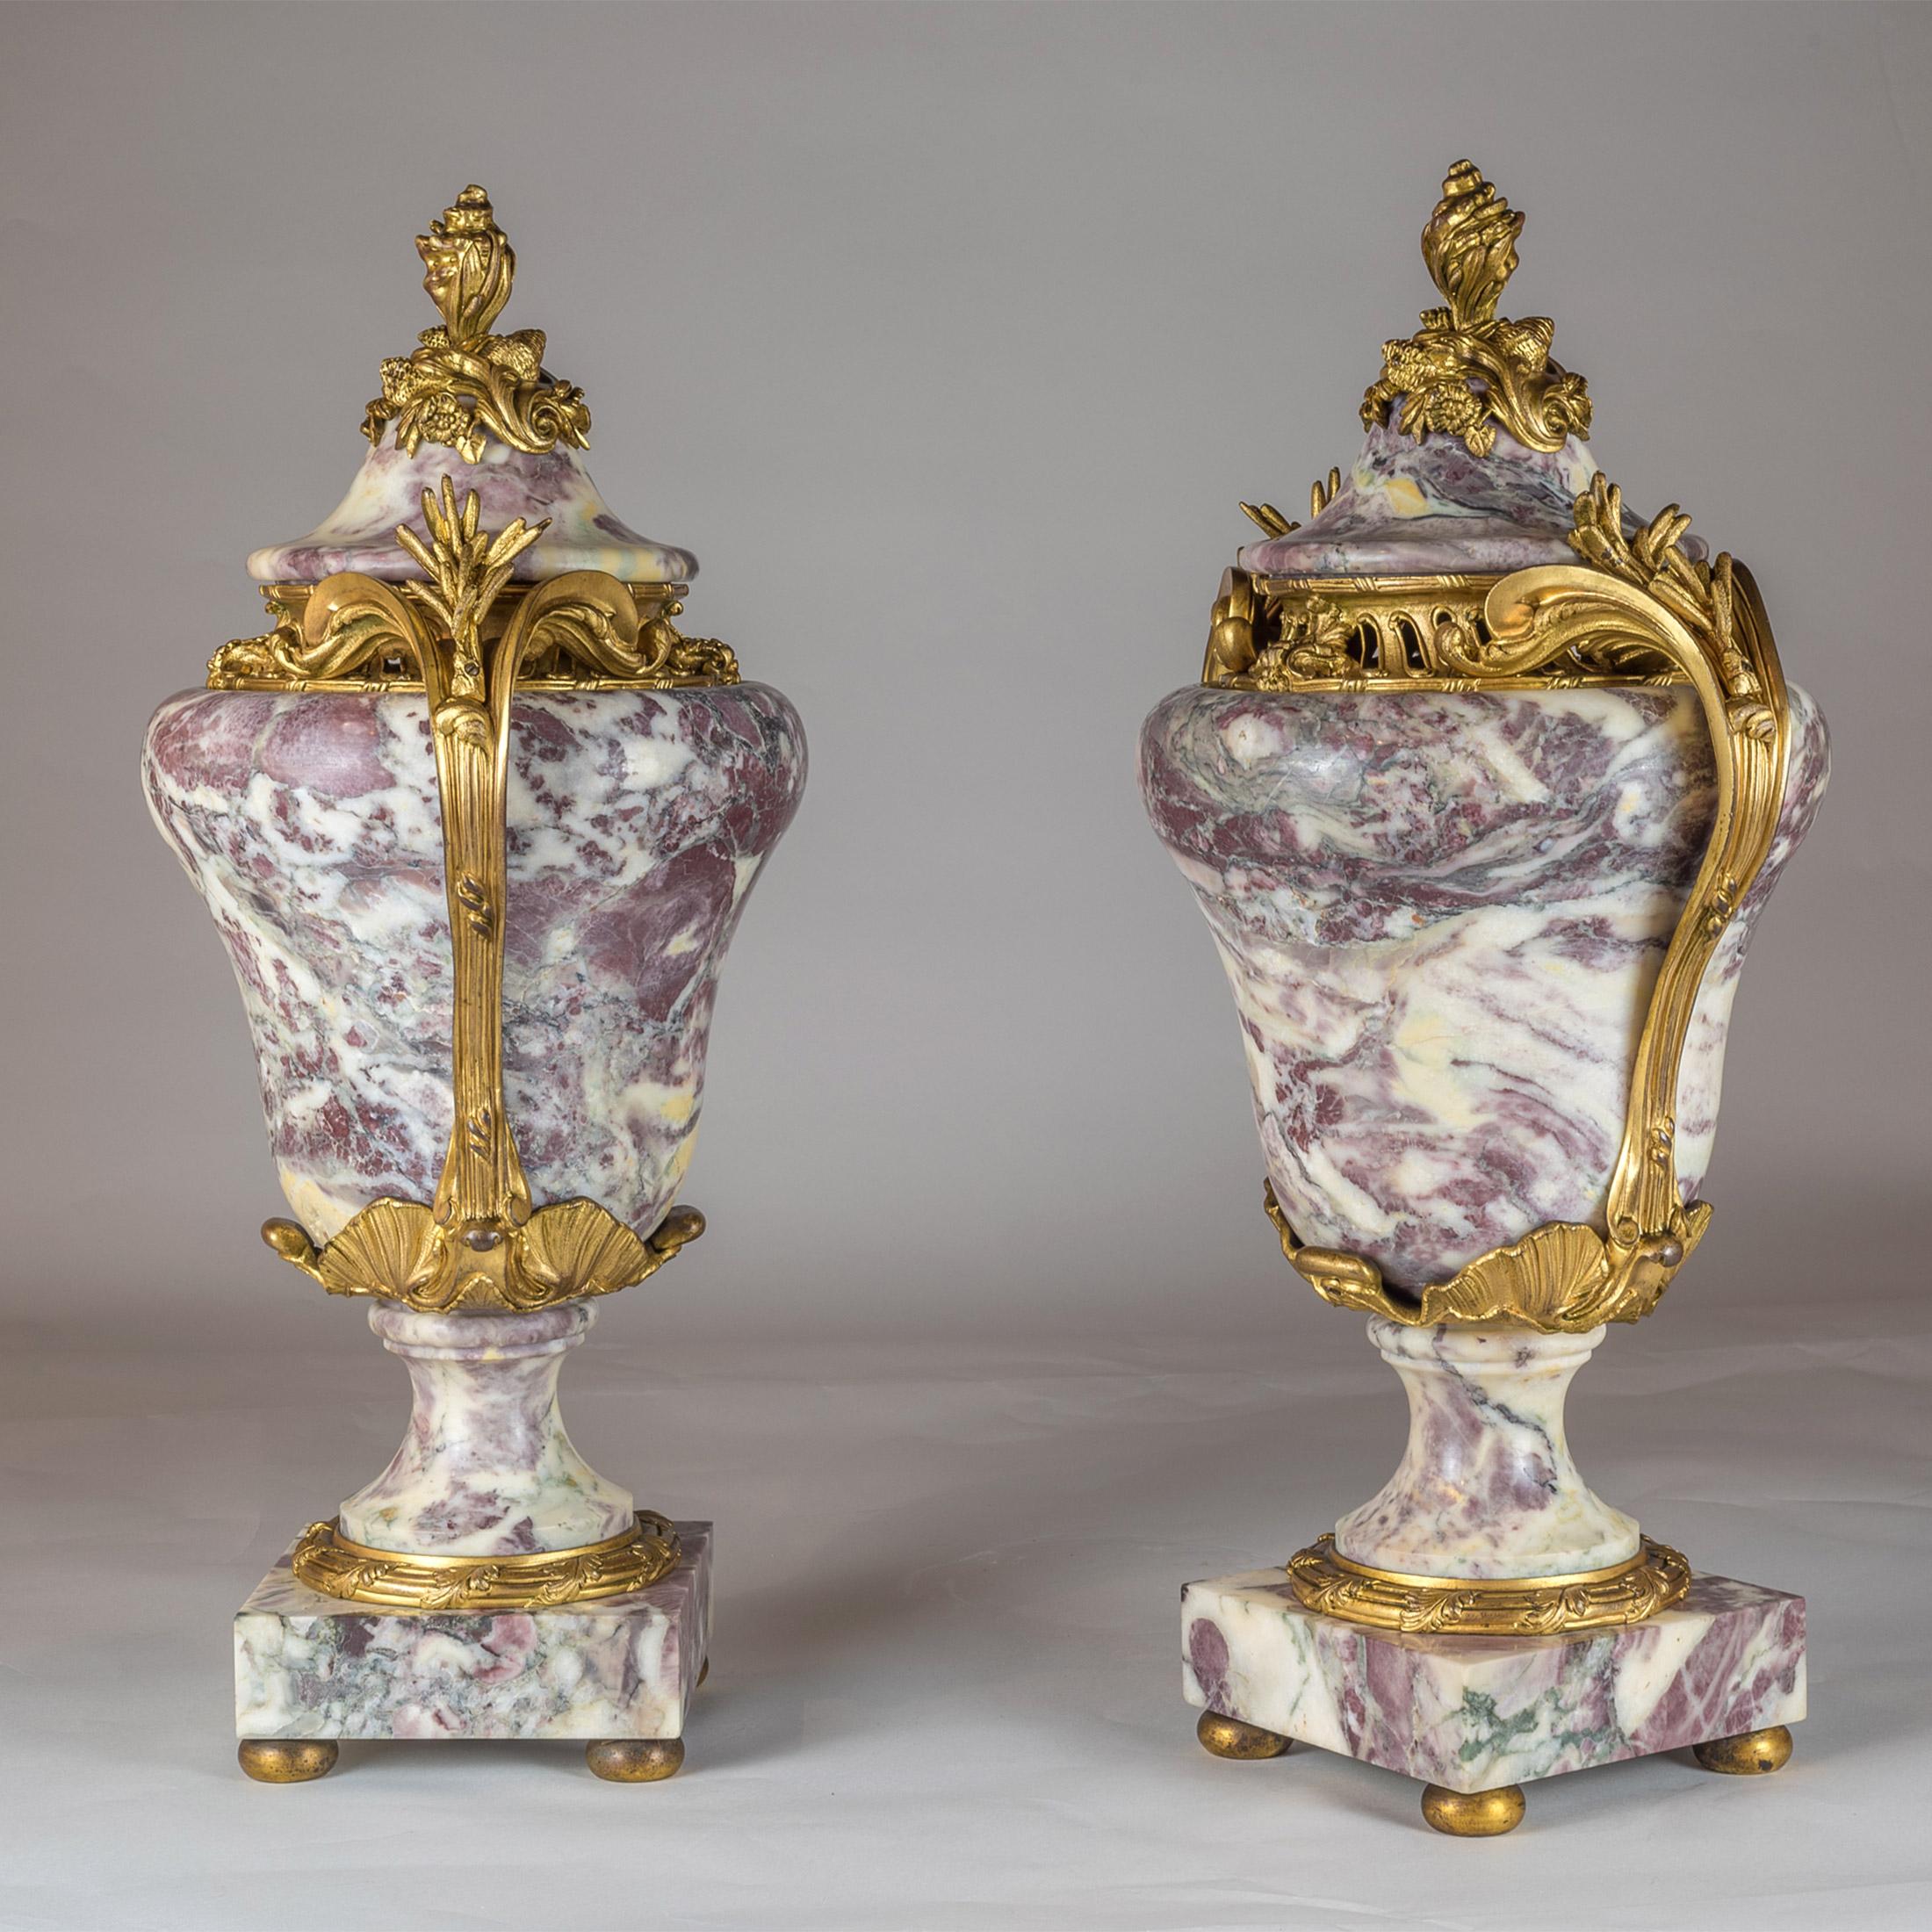 A pair of fine quality Louis XV ormolu-mounted Sarrancolin marble urn and cover.
Each with a bulbous body on a stepped plinth. 

Origin: French?
Date: 19th century?
Dimension: 23 inches high.